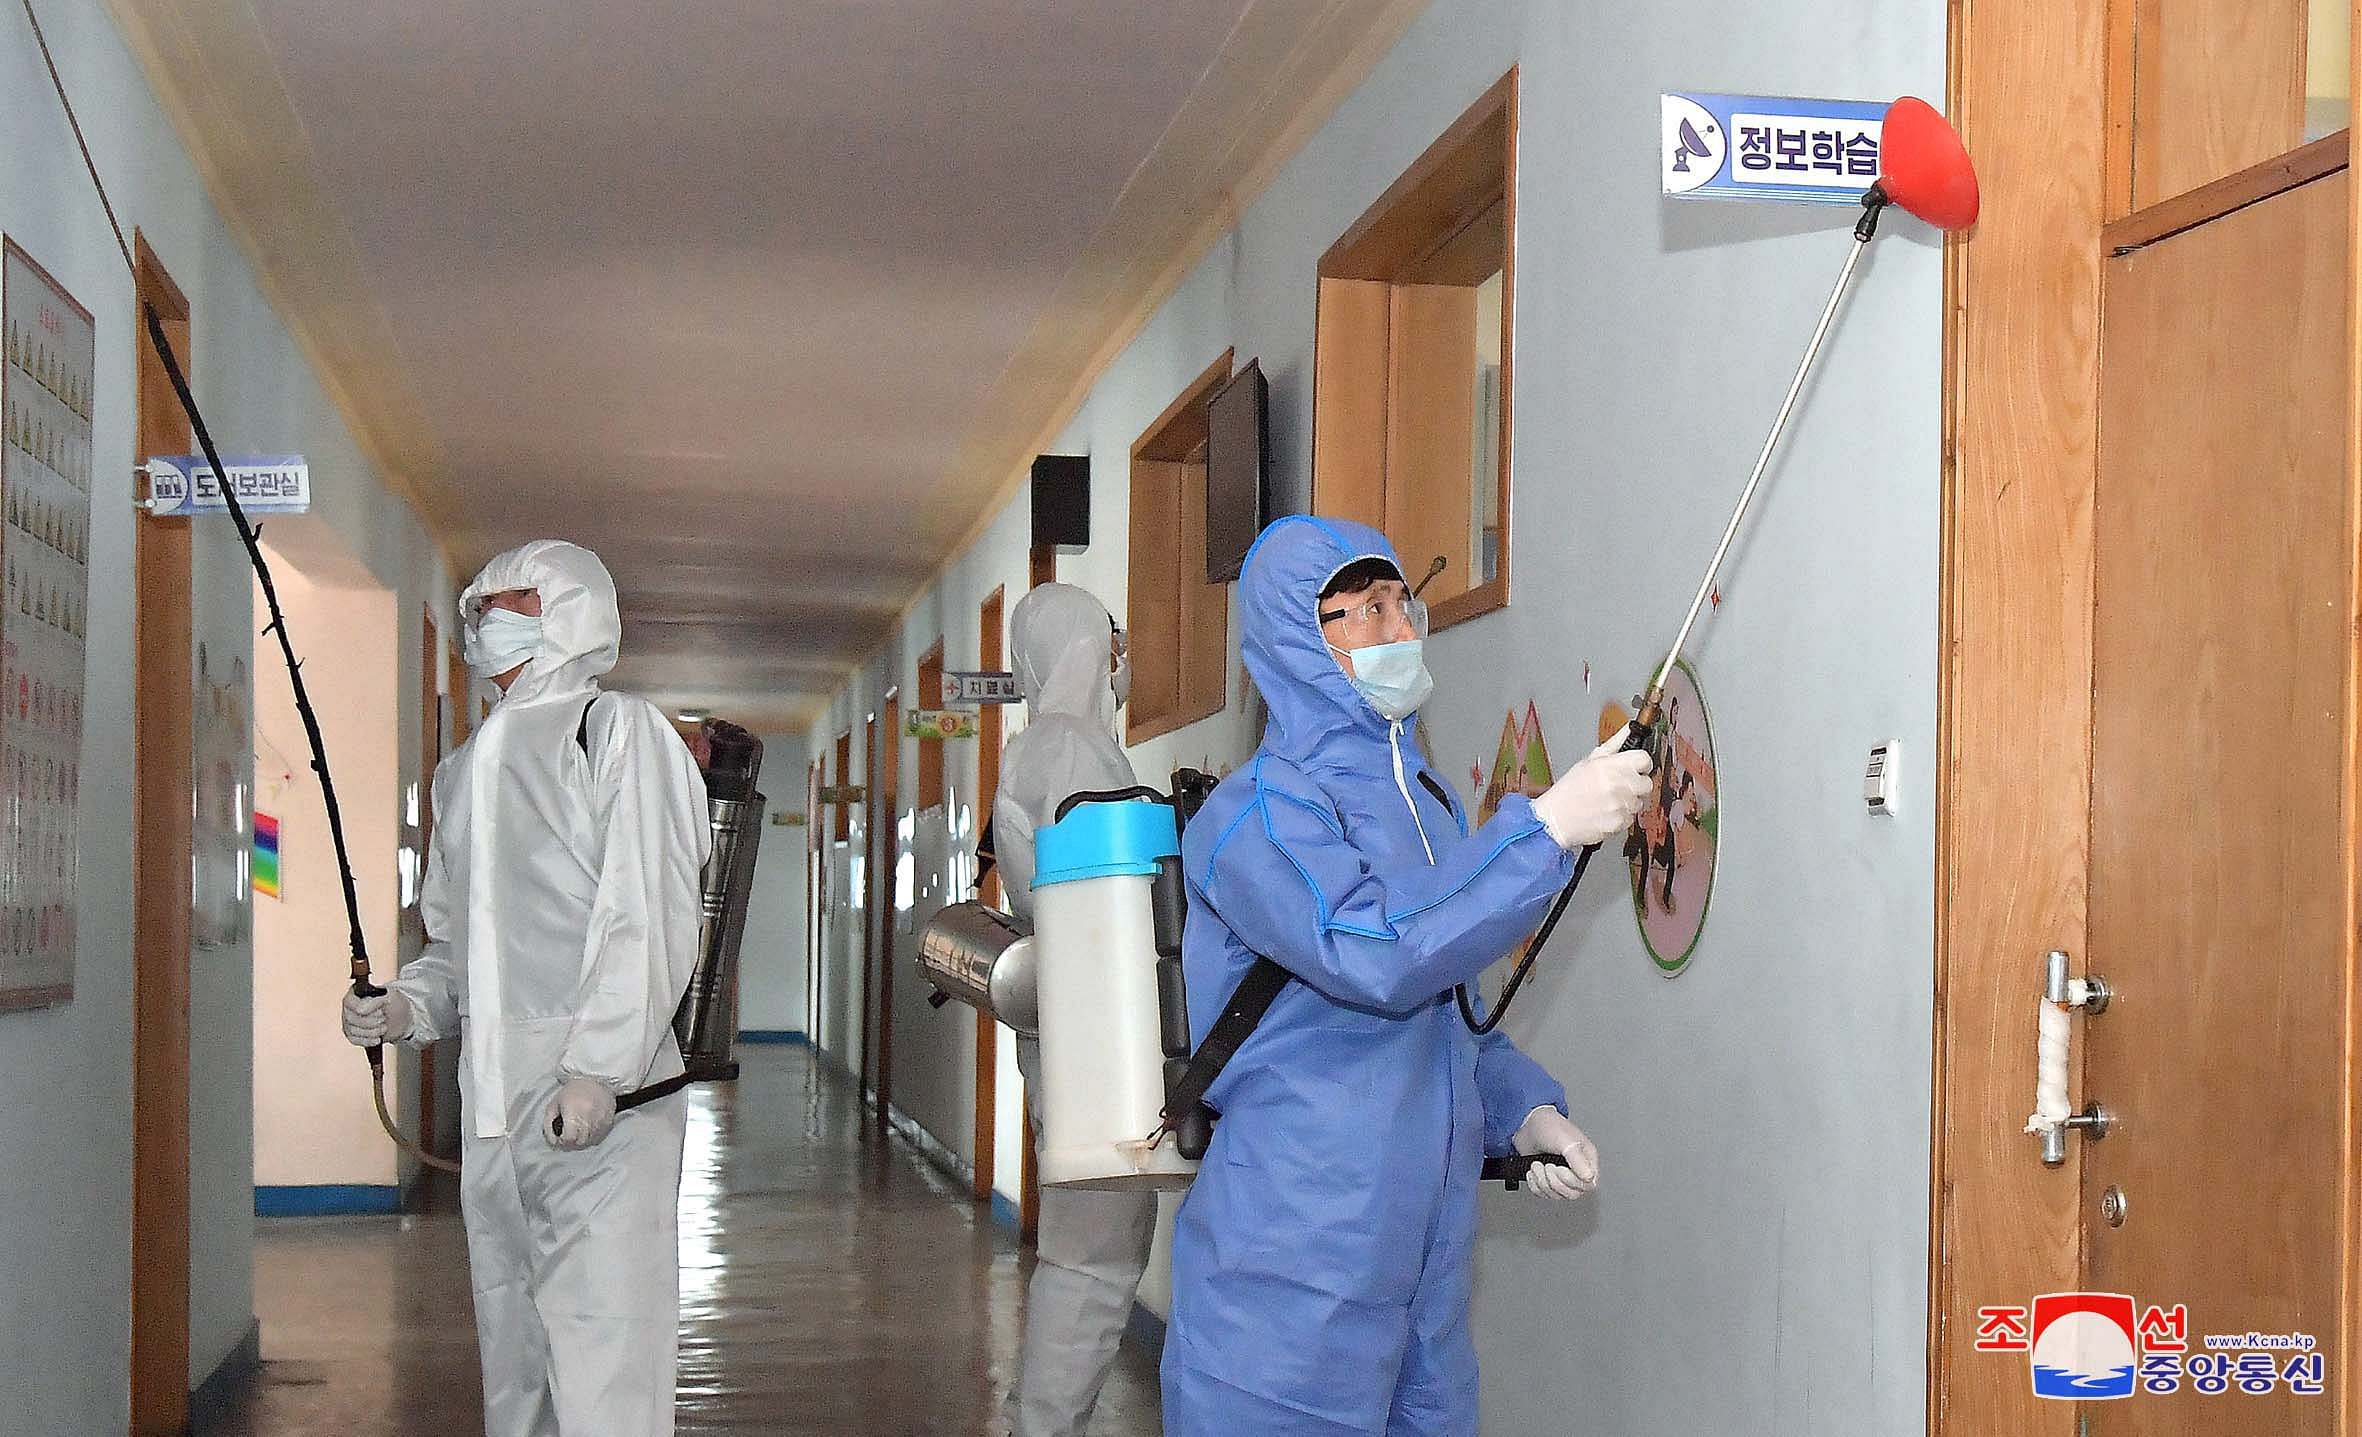 Volunteers carry out disinfection work during an anti-virus campaign in Pyongyang, North Korea. (Credit: Reuters/ KNCA)